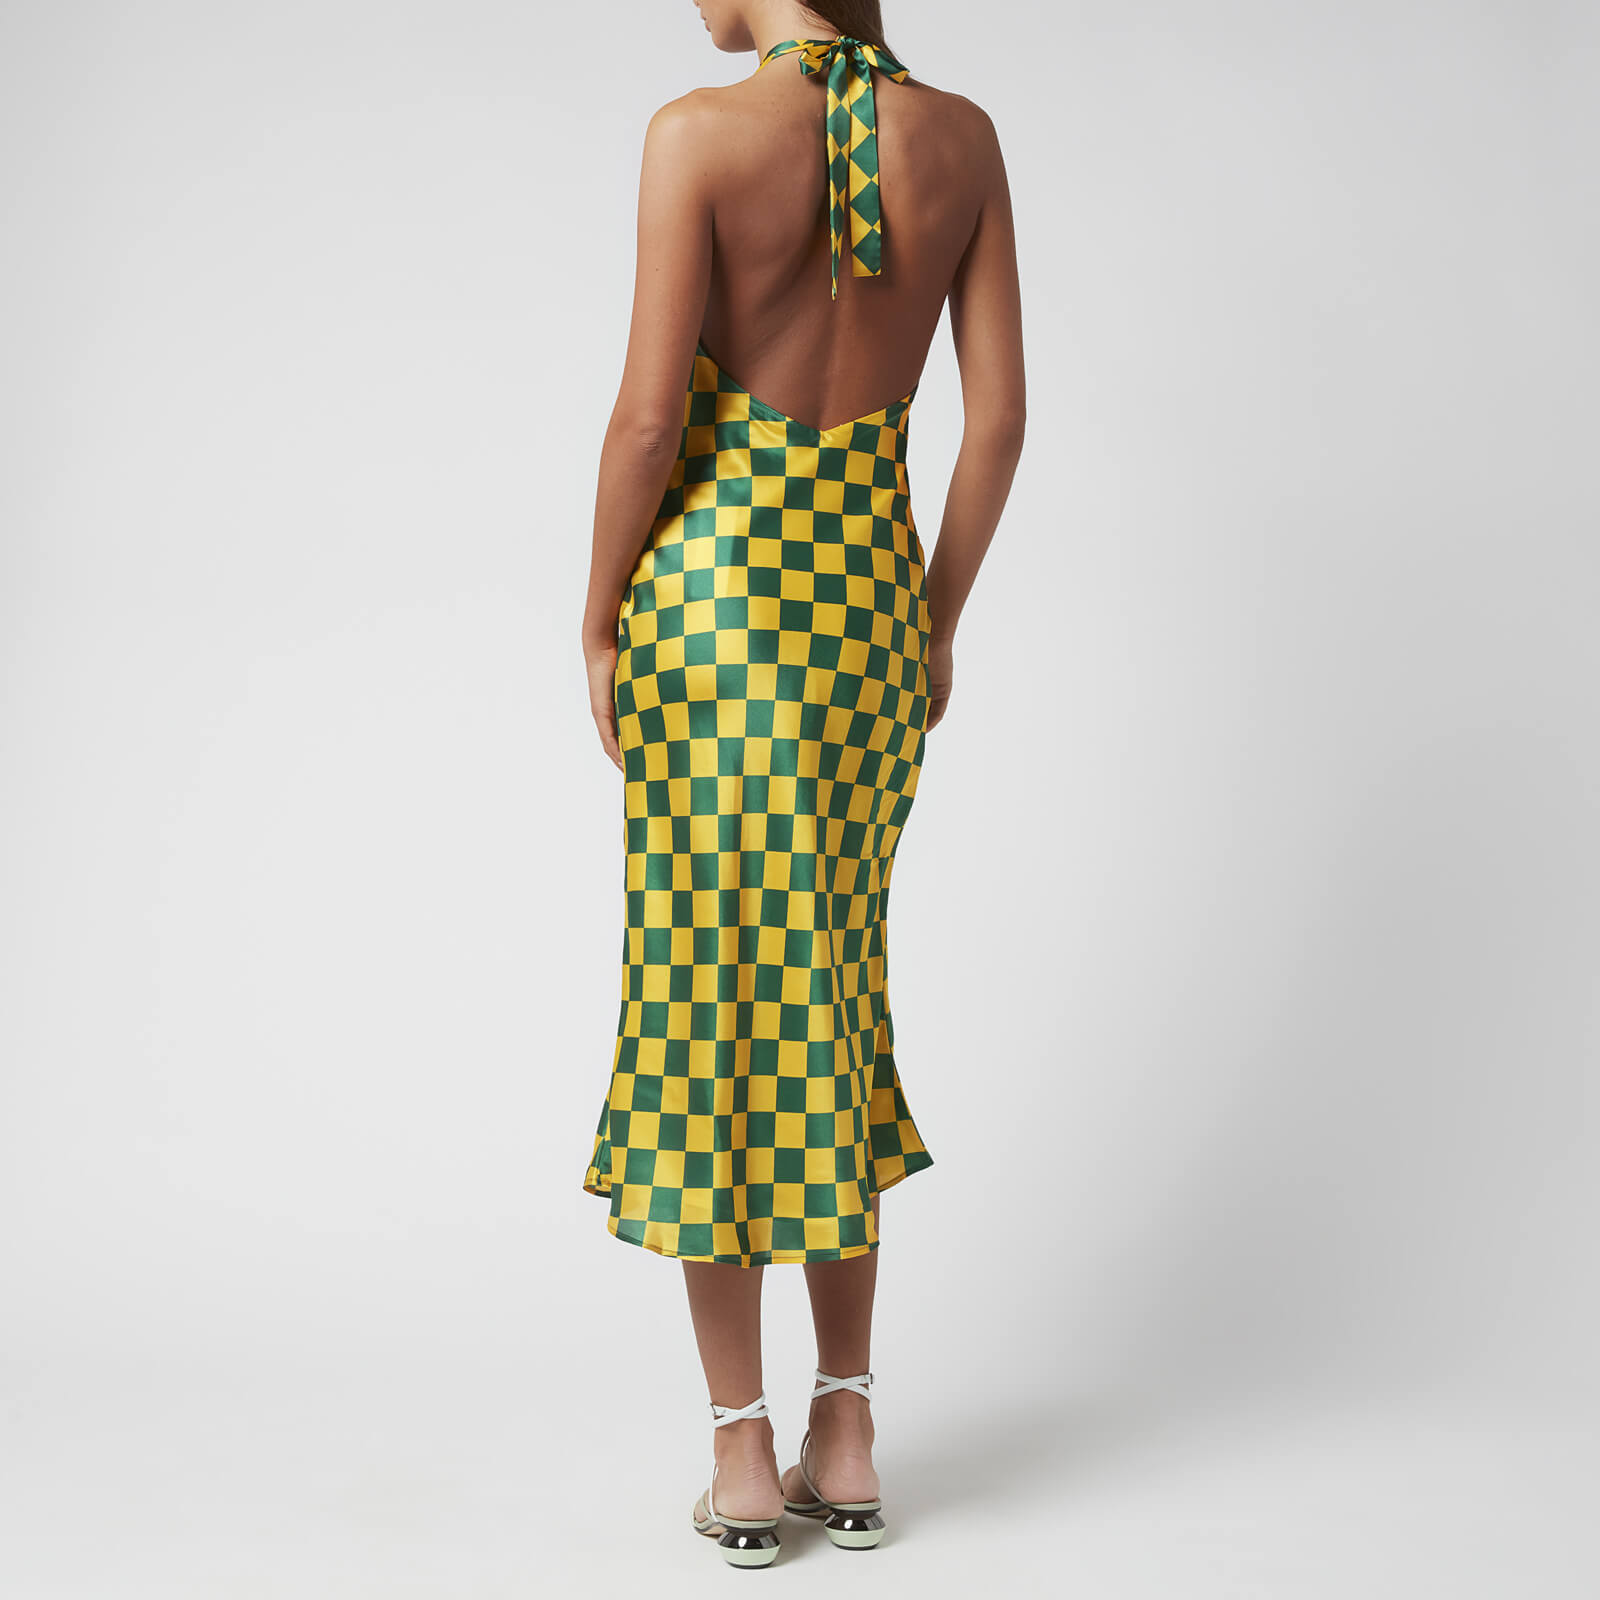 Artikel klicken und genauer betrachten! - Olivia Rubin invigorates her Emmy dress with a larger-than-life green and yellow check print. Featuring an elegant halterneck, the backless midi is cut from silk-satin on the bias for a flowing and feminine silhouette that skims your figure. Pair with chunky boots for a striking daytime edit. | im Online Shop kaufen